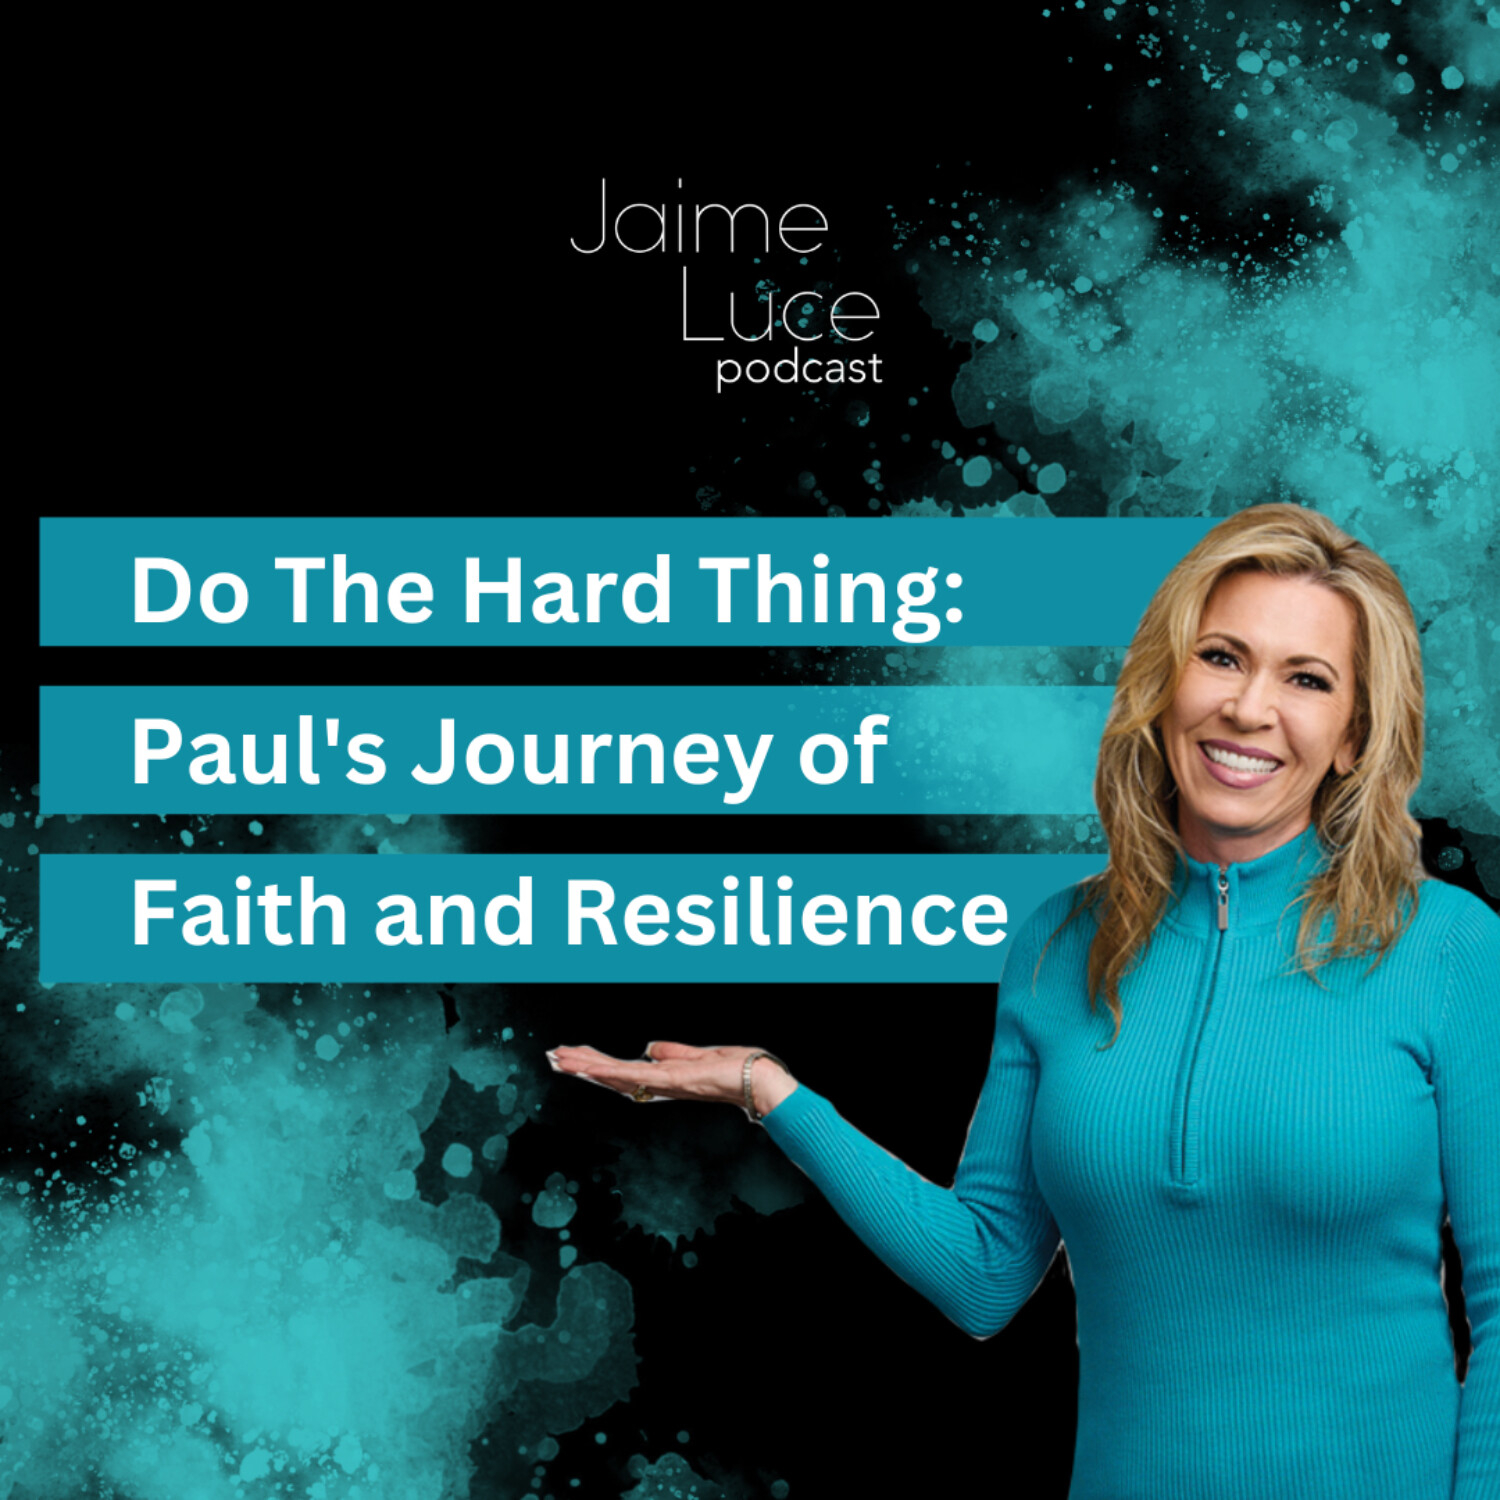 Do The Hard Thing: Paul's Journey of Faith and Resilience